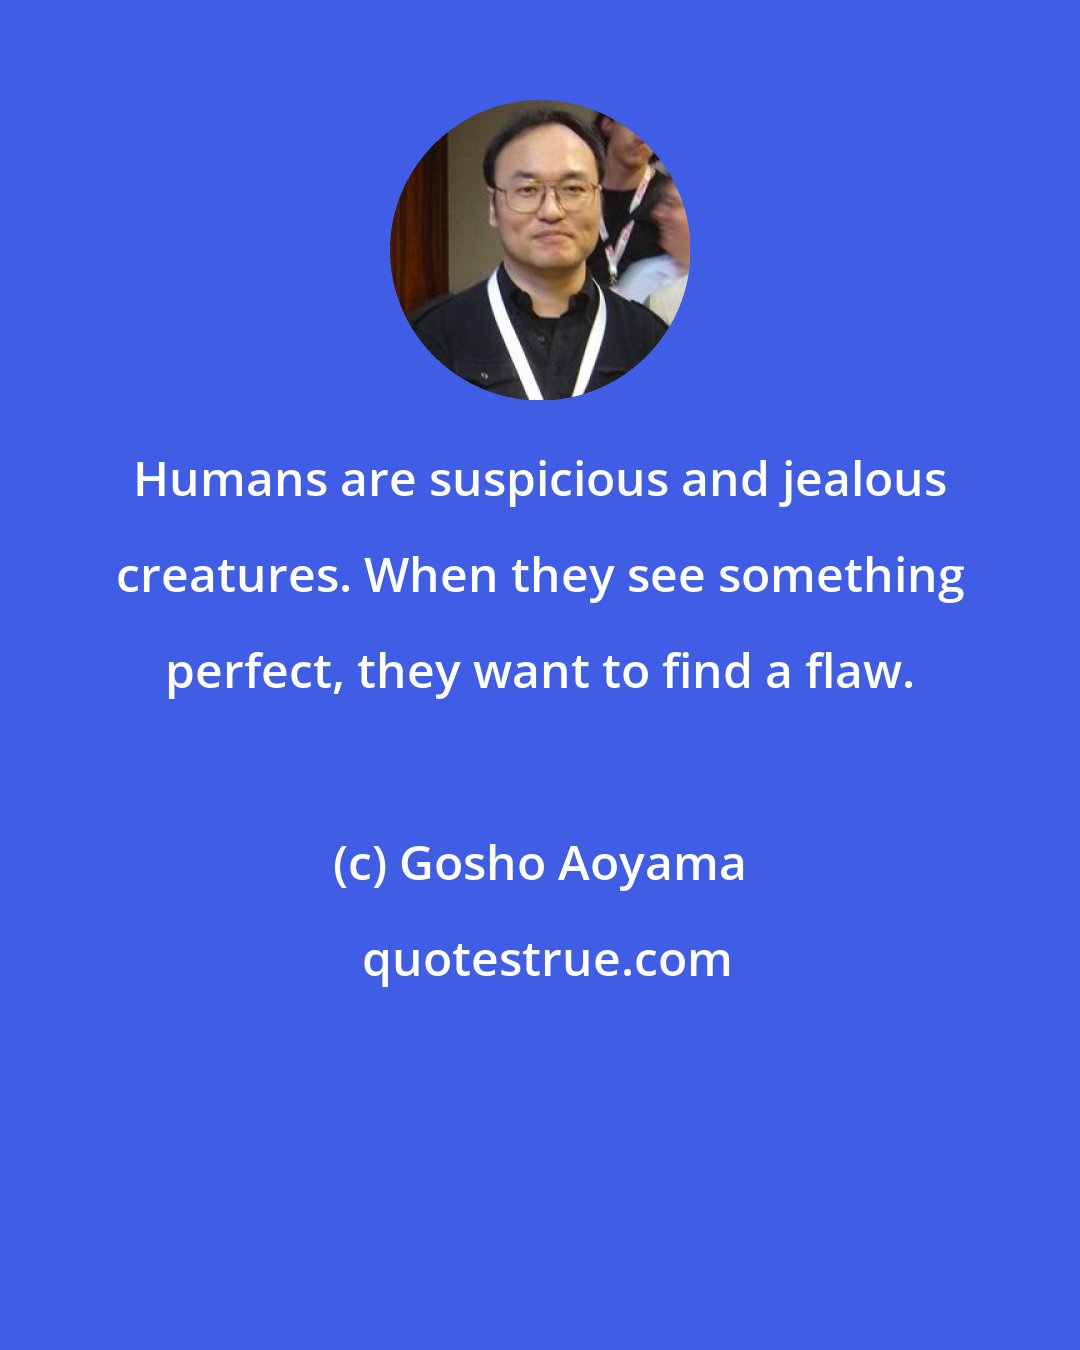 Gosho Aoyama: Humans are suspicious and jealous creatures. When they see something perfect, they want to find a flaw.